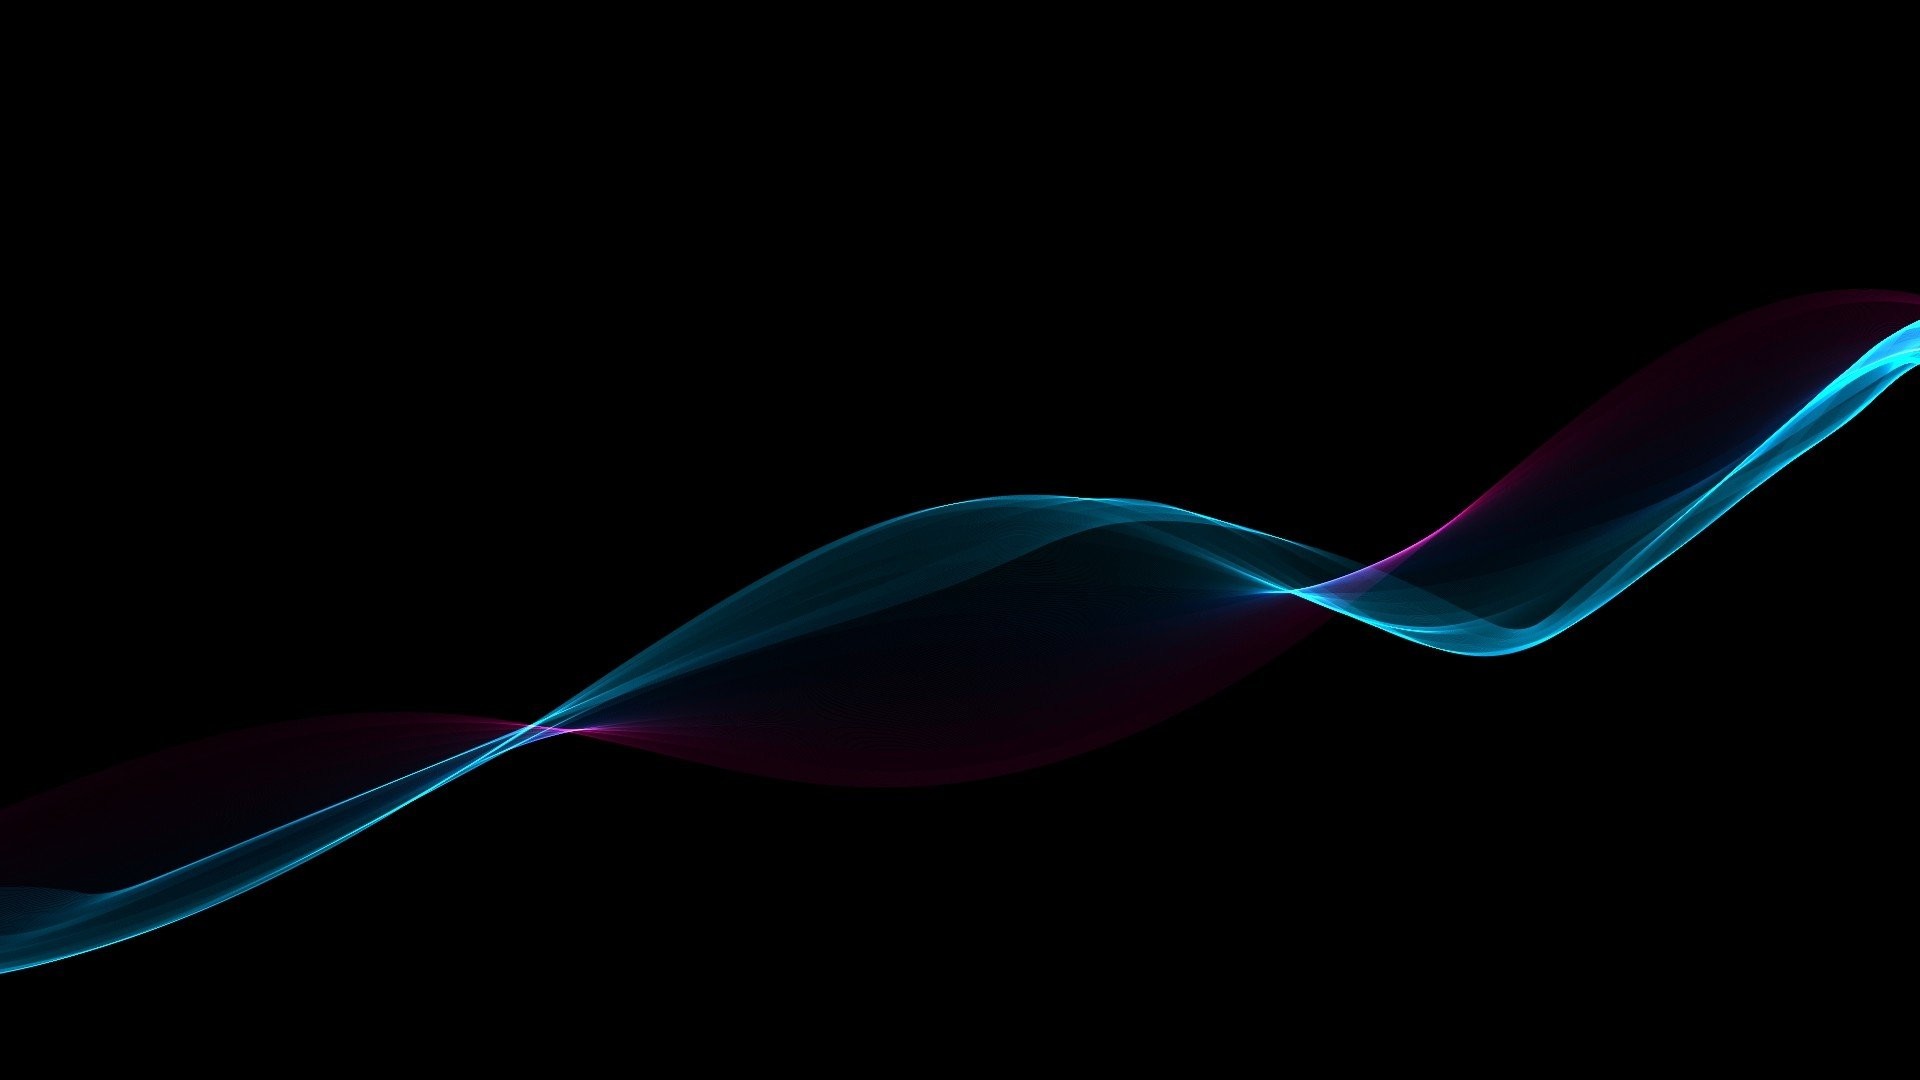 1920x1080 Wallpapers - Dark Gradient Wallpaper by Sharpyne - Customize.org